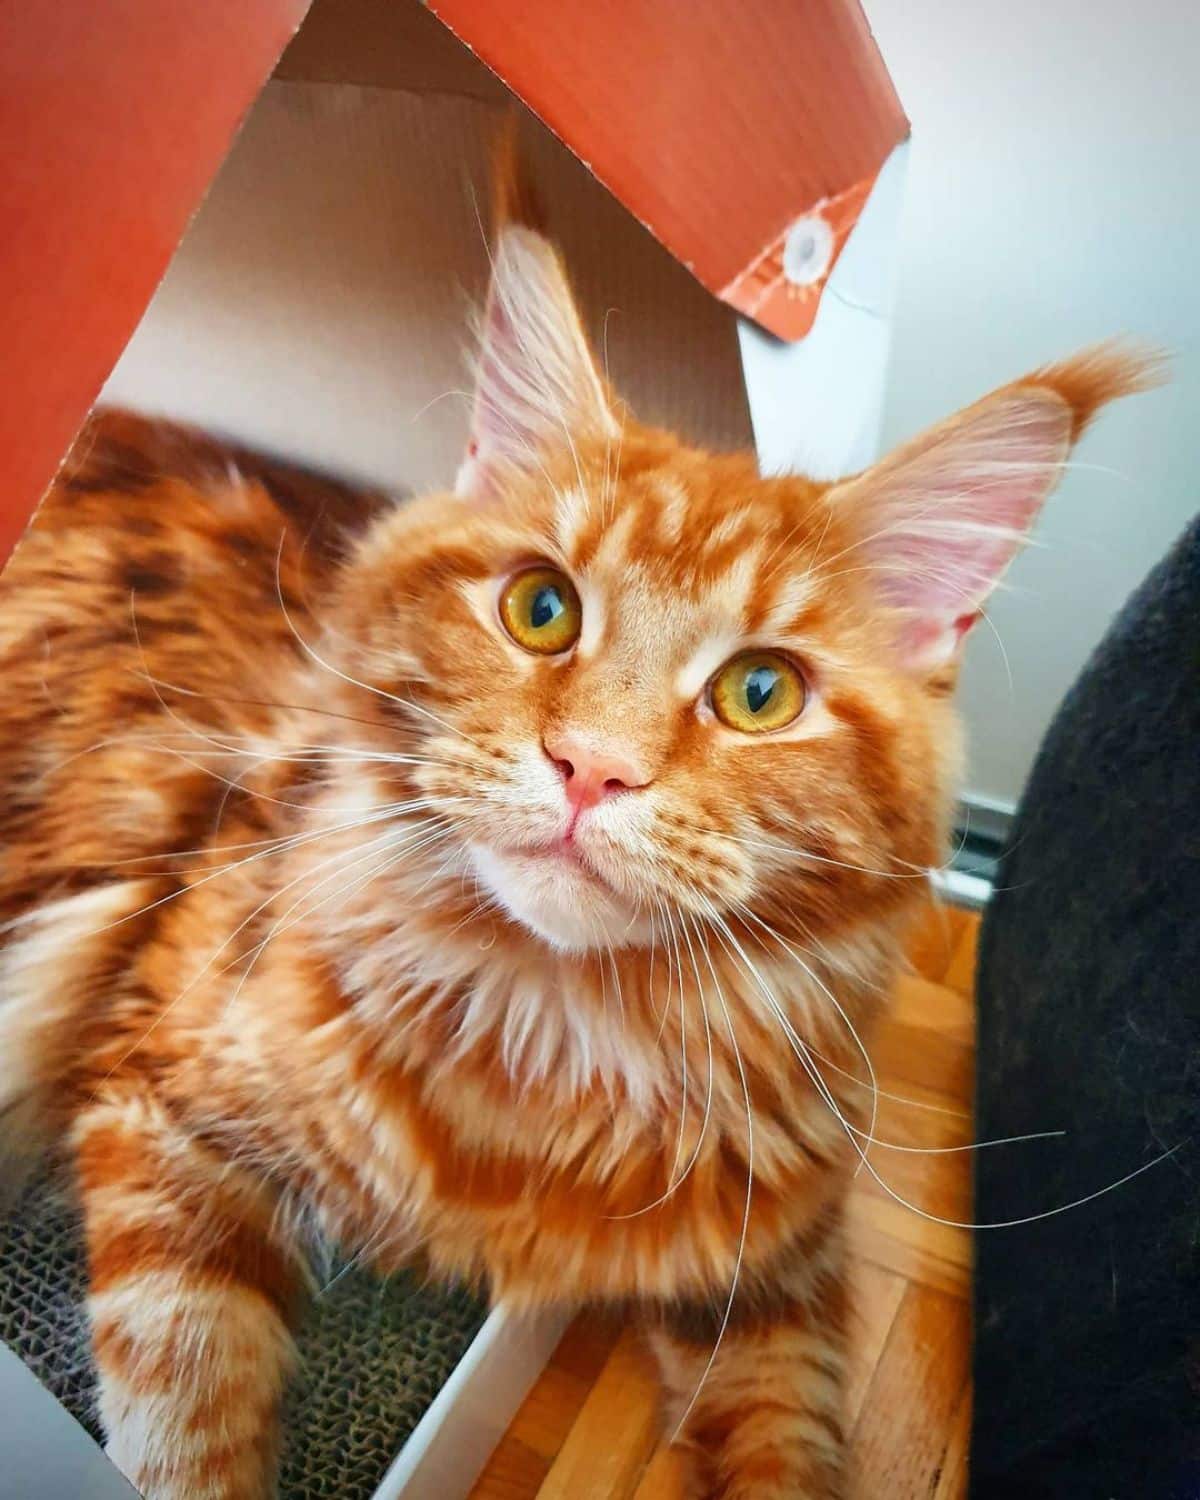 An adorable ginger maine coon relaxing in a cardboard box.